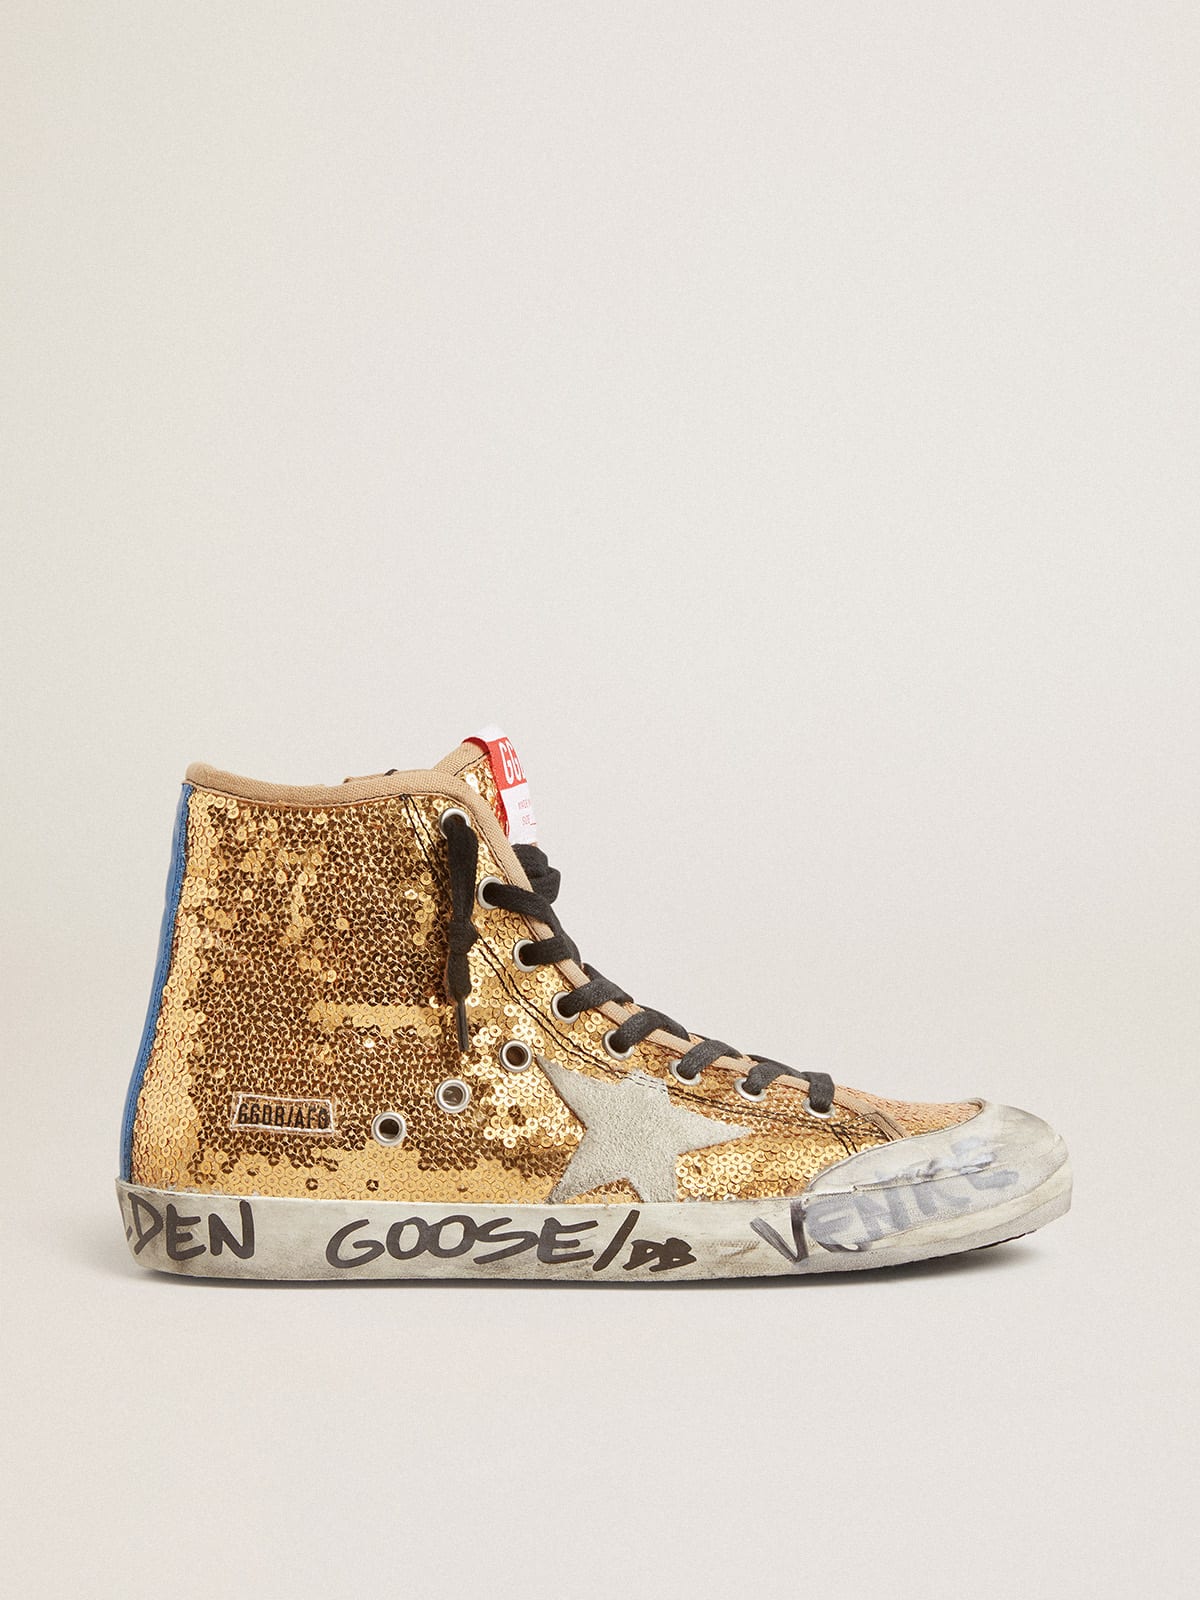 Golden Goose - Francy Penstar in gold glitter with suede star and bright blue heel tab in 